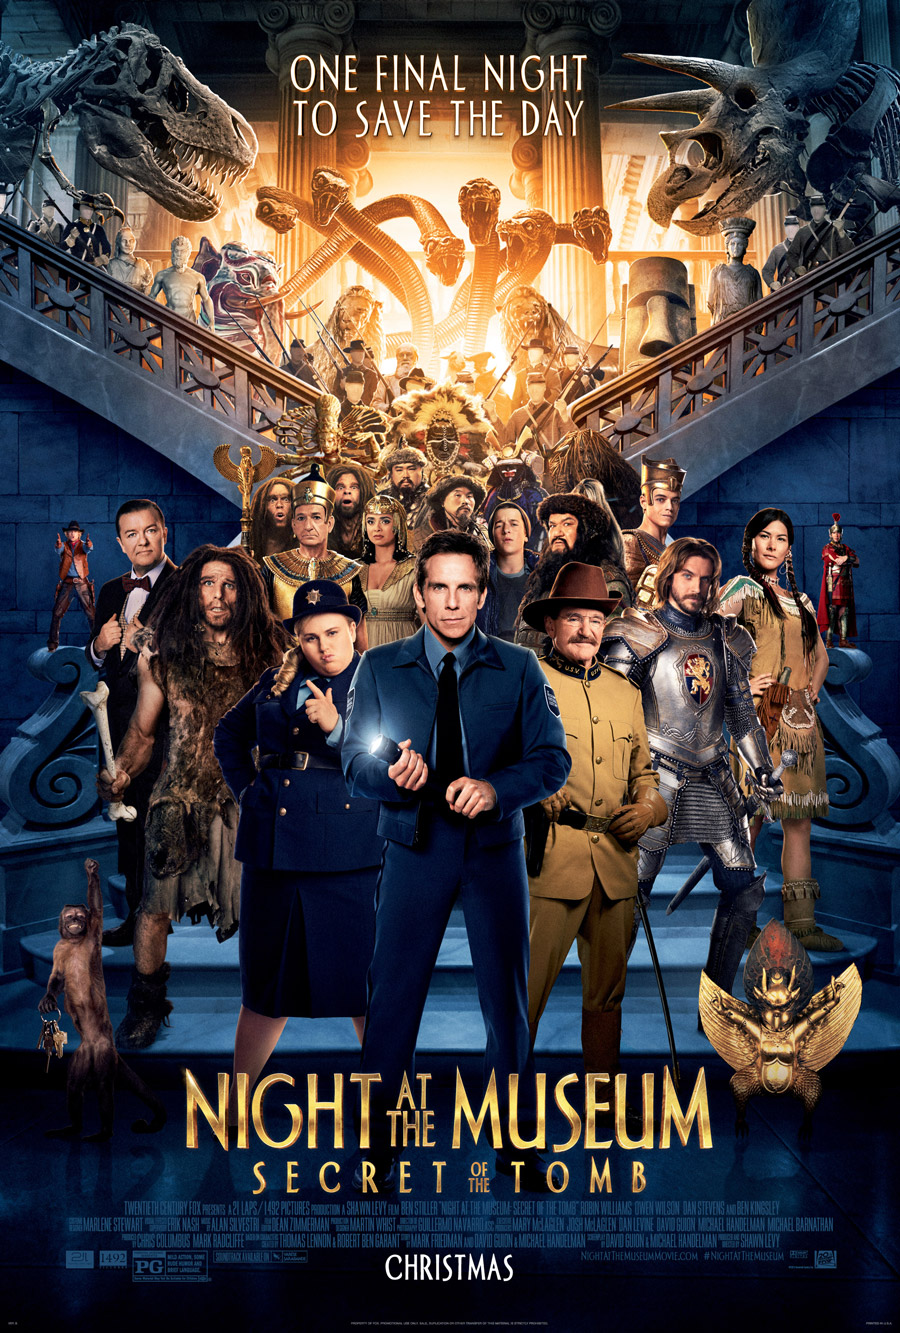 Night at the Museum: Secret of the Tomb (2D) Movie Released Theatres List in Hyderabad